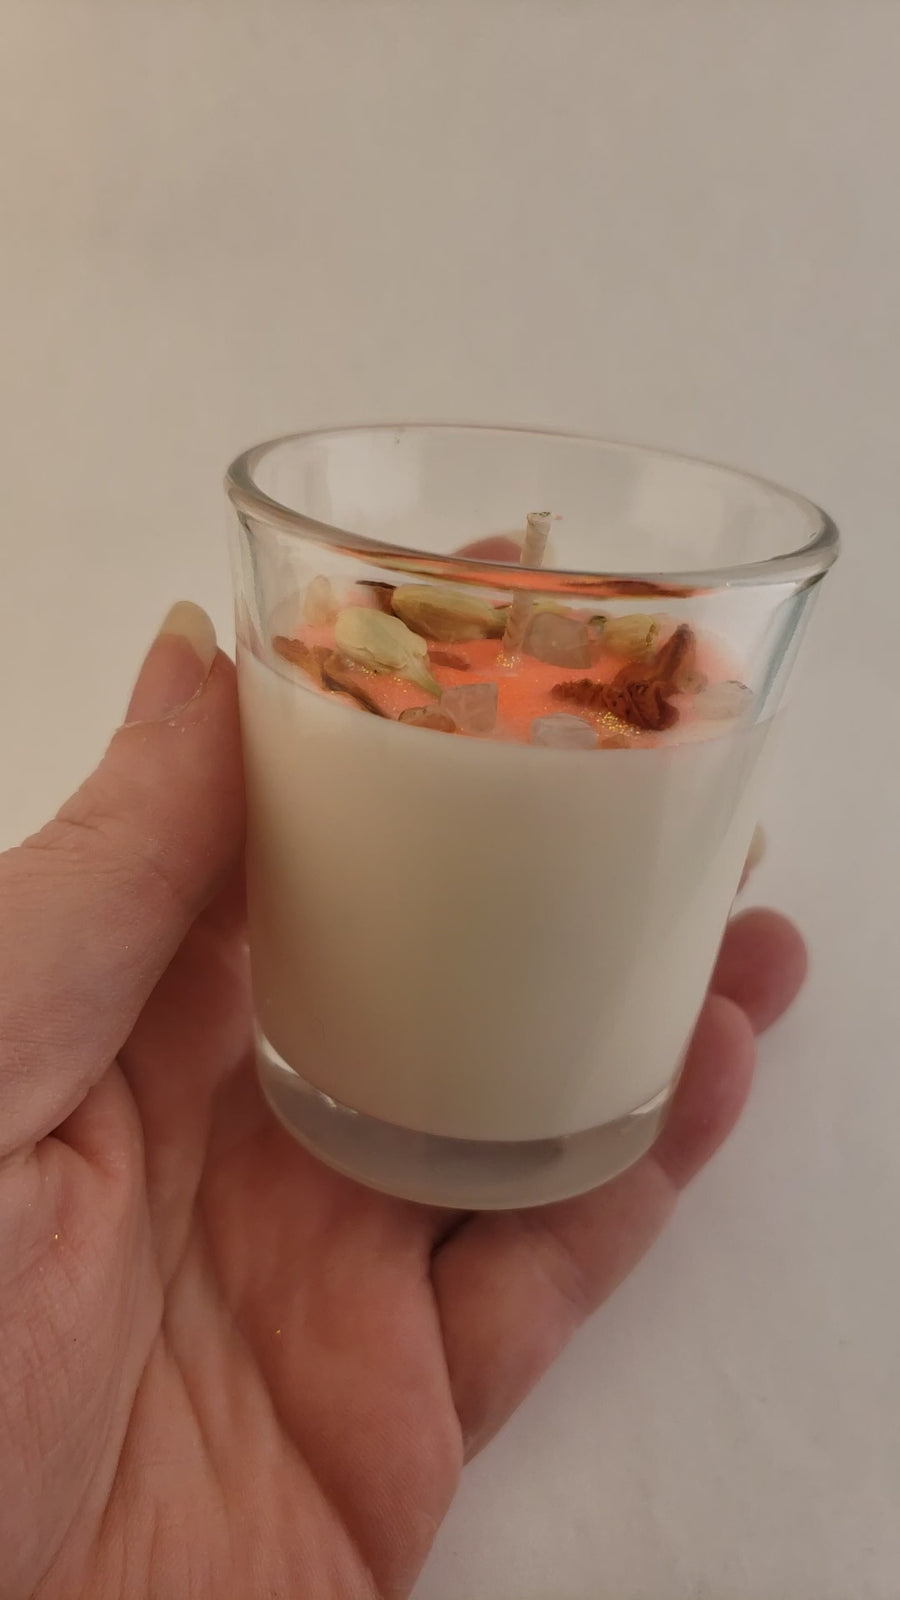 Sensual - Votive Coconut Soy Wax Handmade Scented Candle - Video